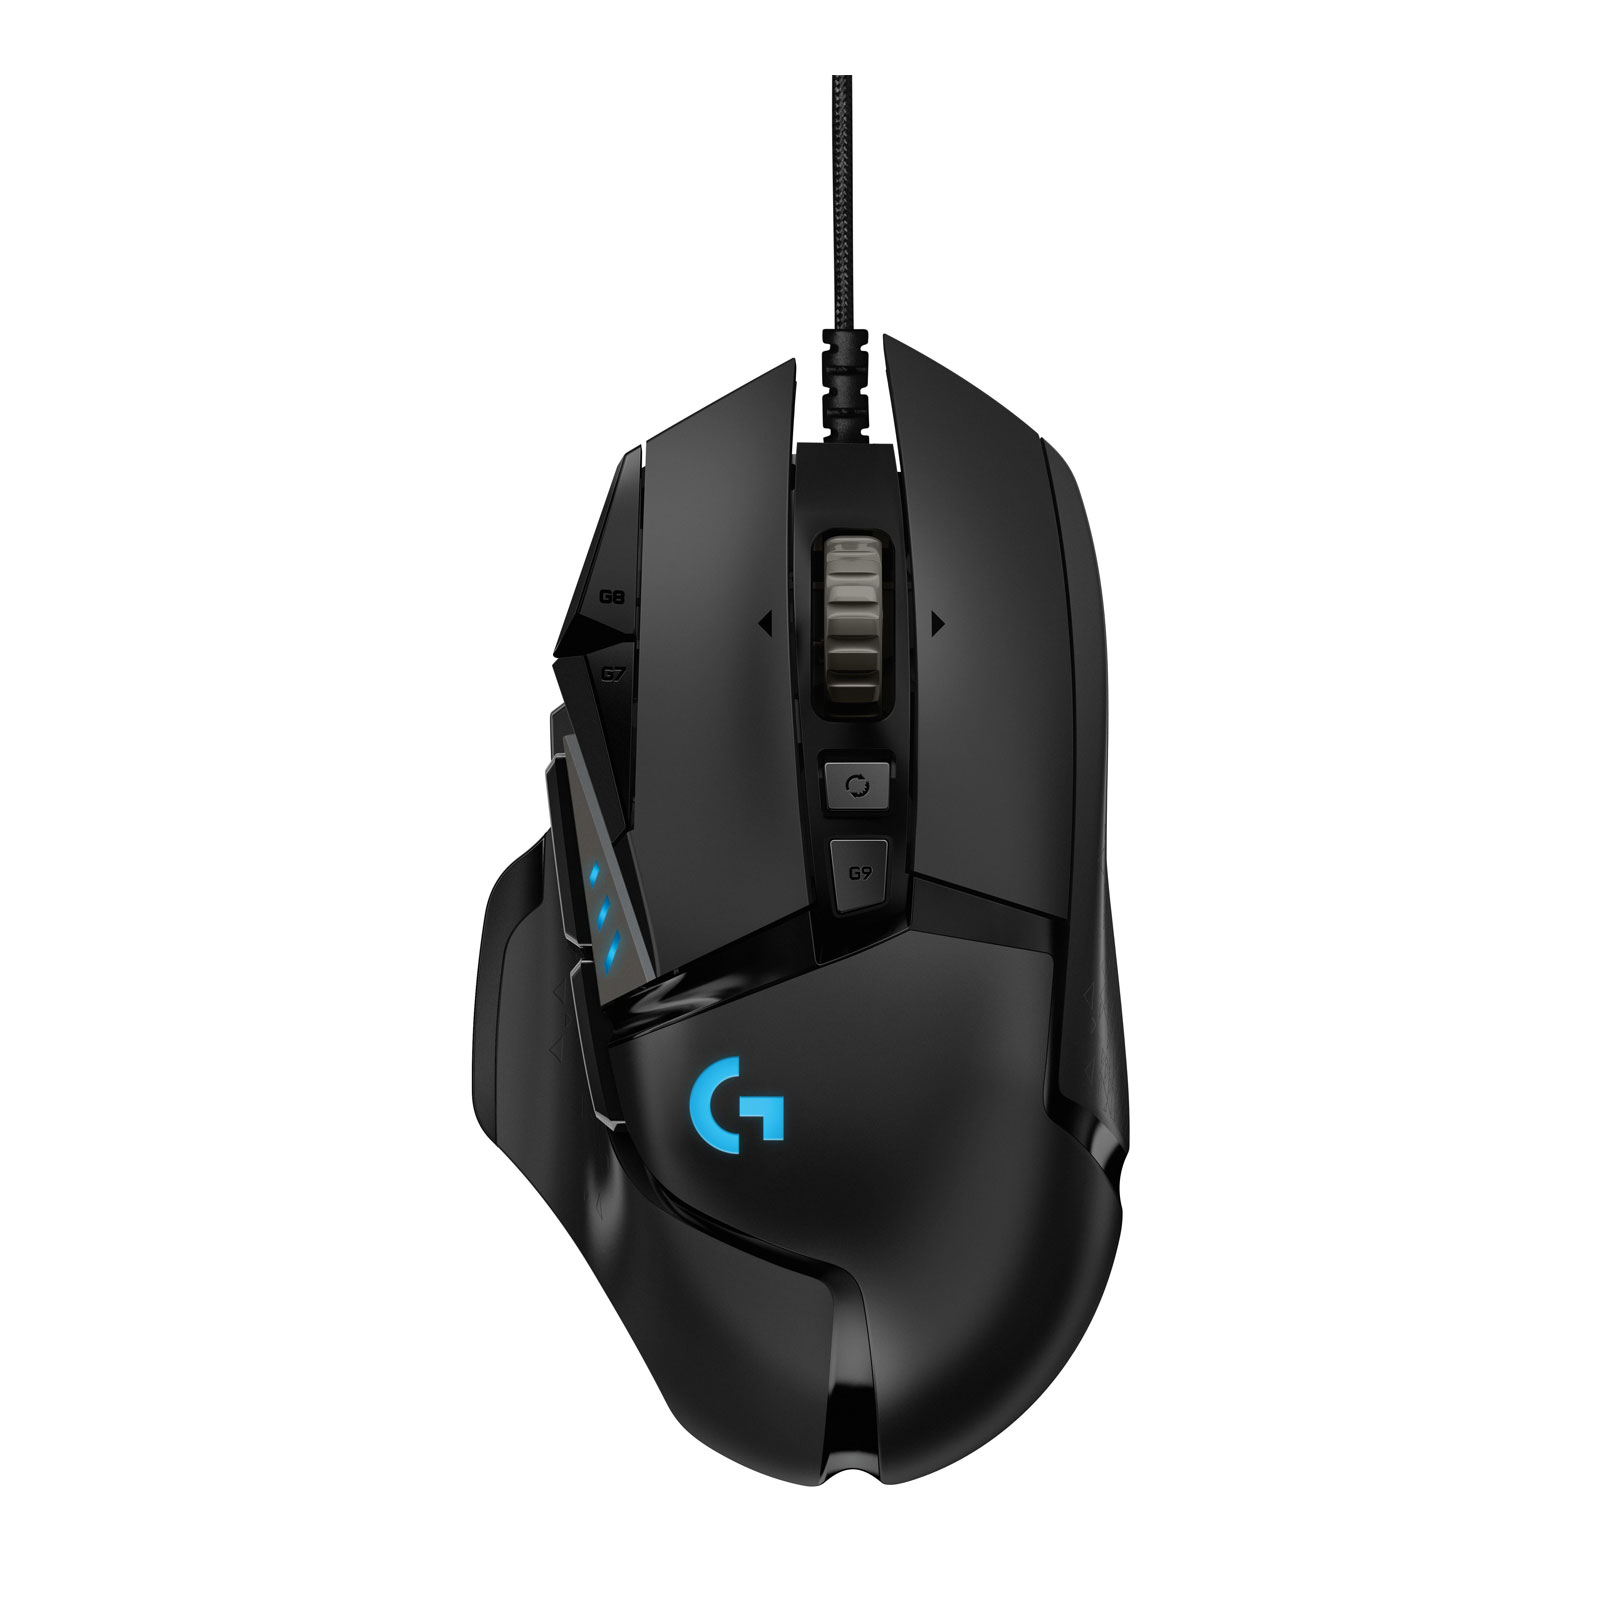 Logitech G502 High Performance Gaming Mouse